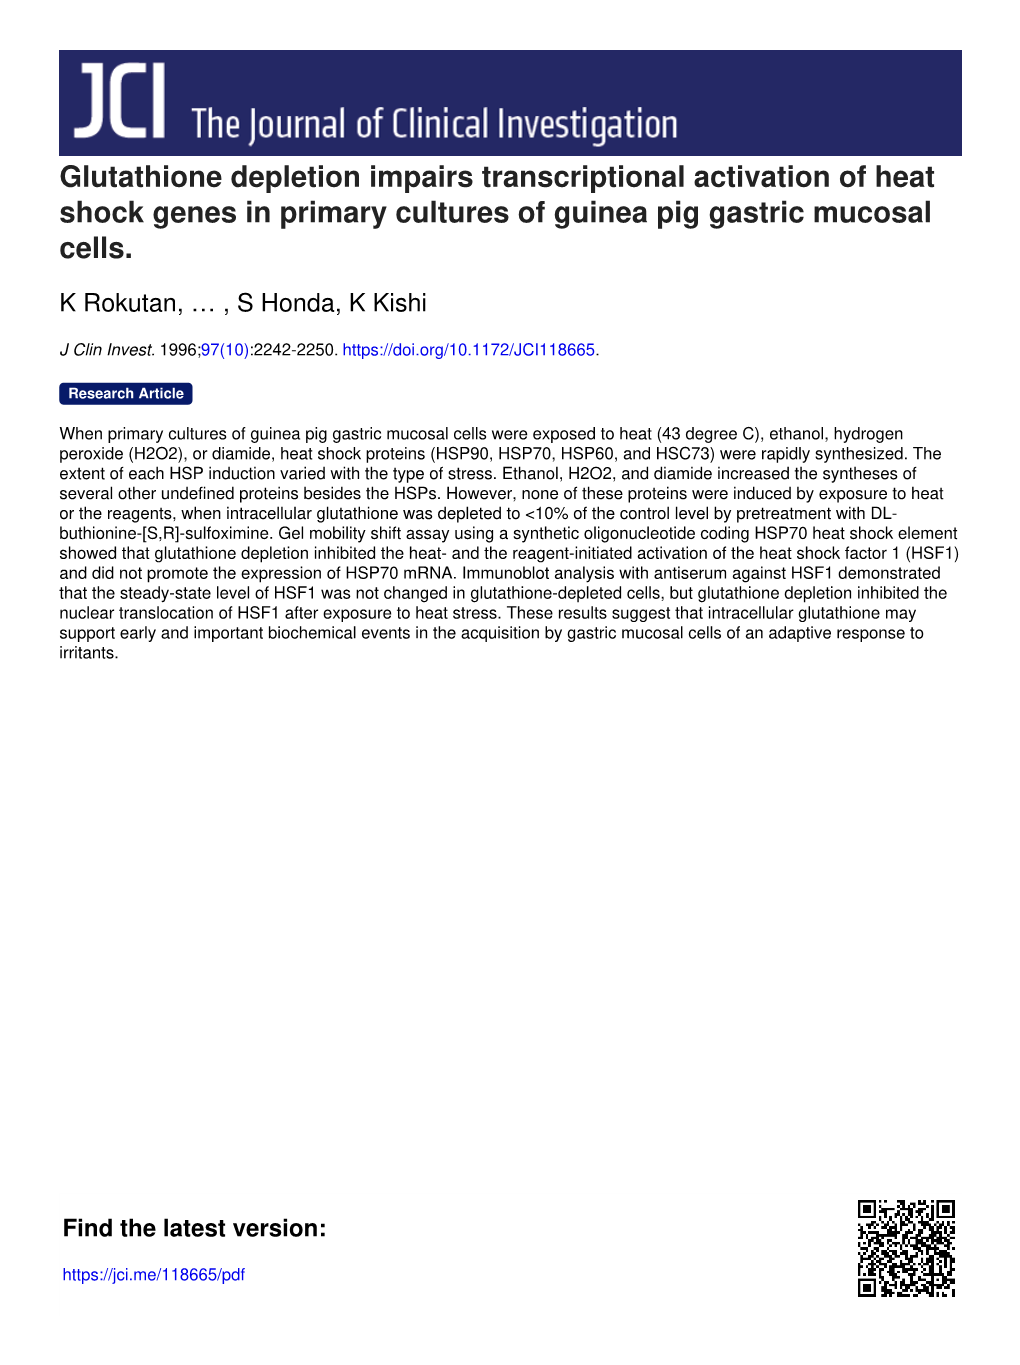 Glutathione Depletion Impairs Transcriptional Activation of Heat Shock Genes in Primary Cultures of Guinea Pig Gastric Mucosal Cells